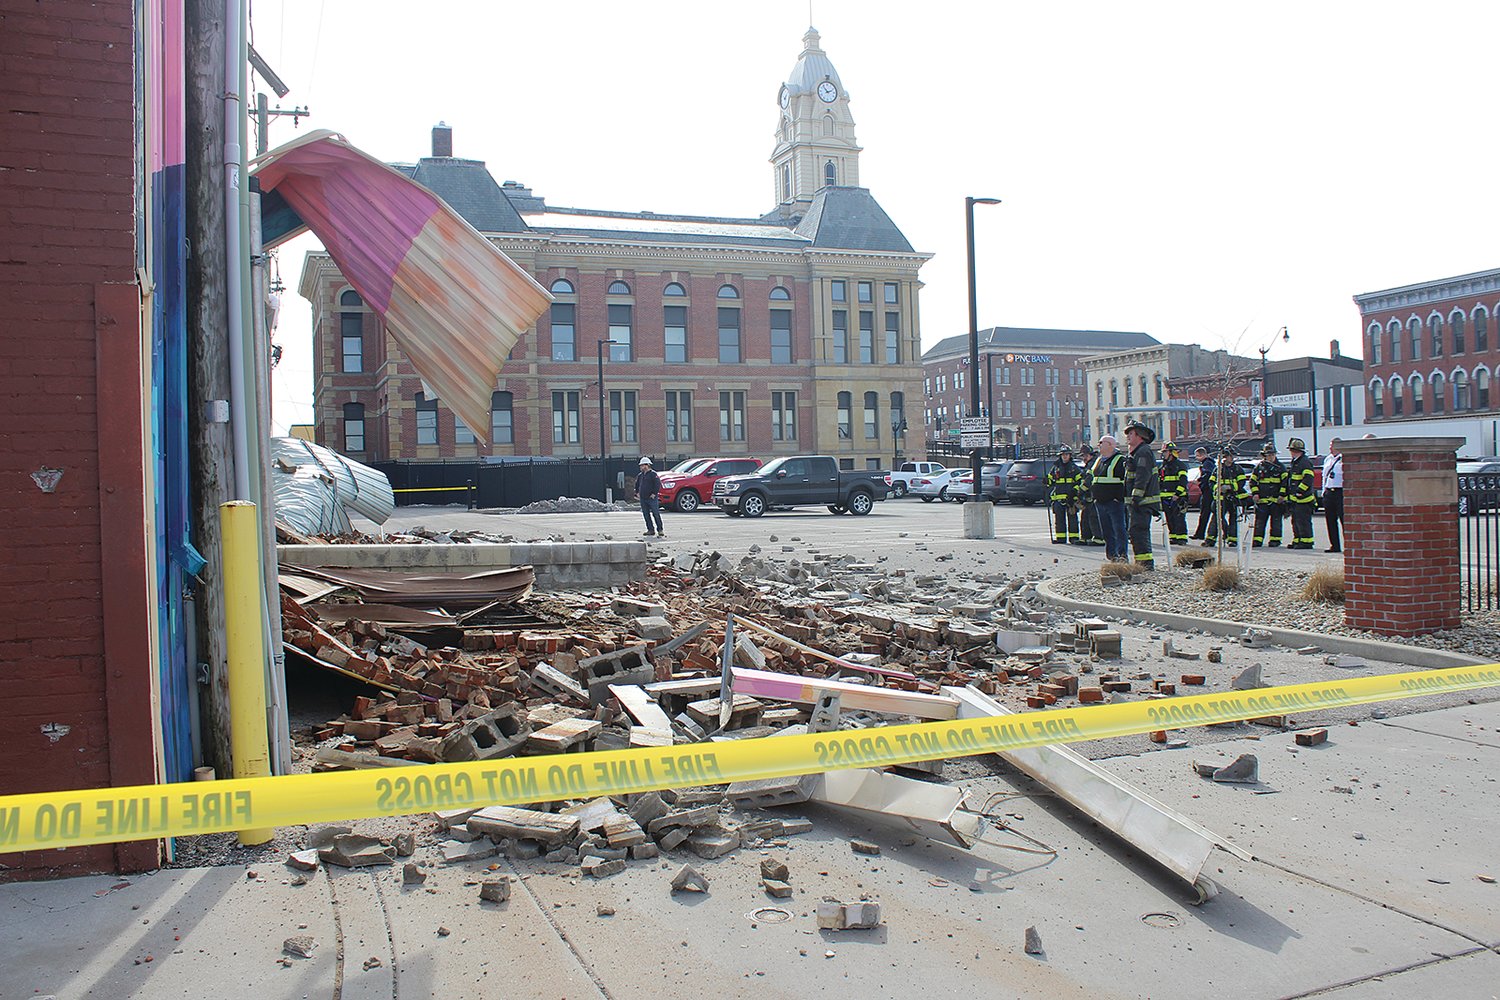 A portion of a brick exterior wall at the Journal Review collapsed around 1 p.m. Monday.